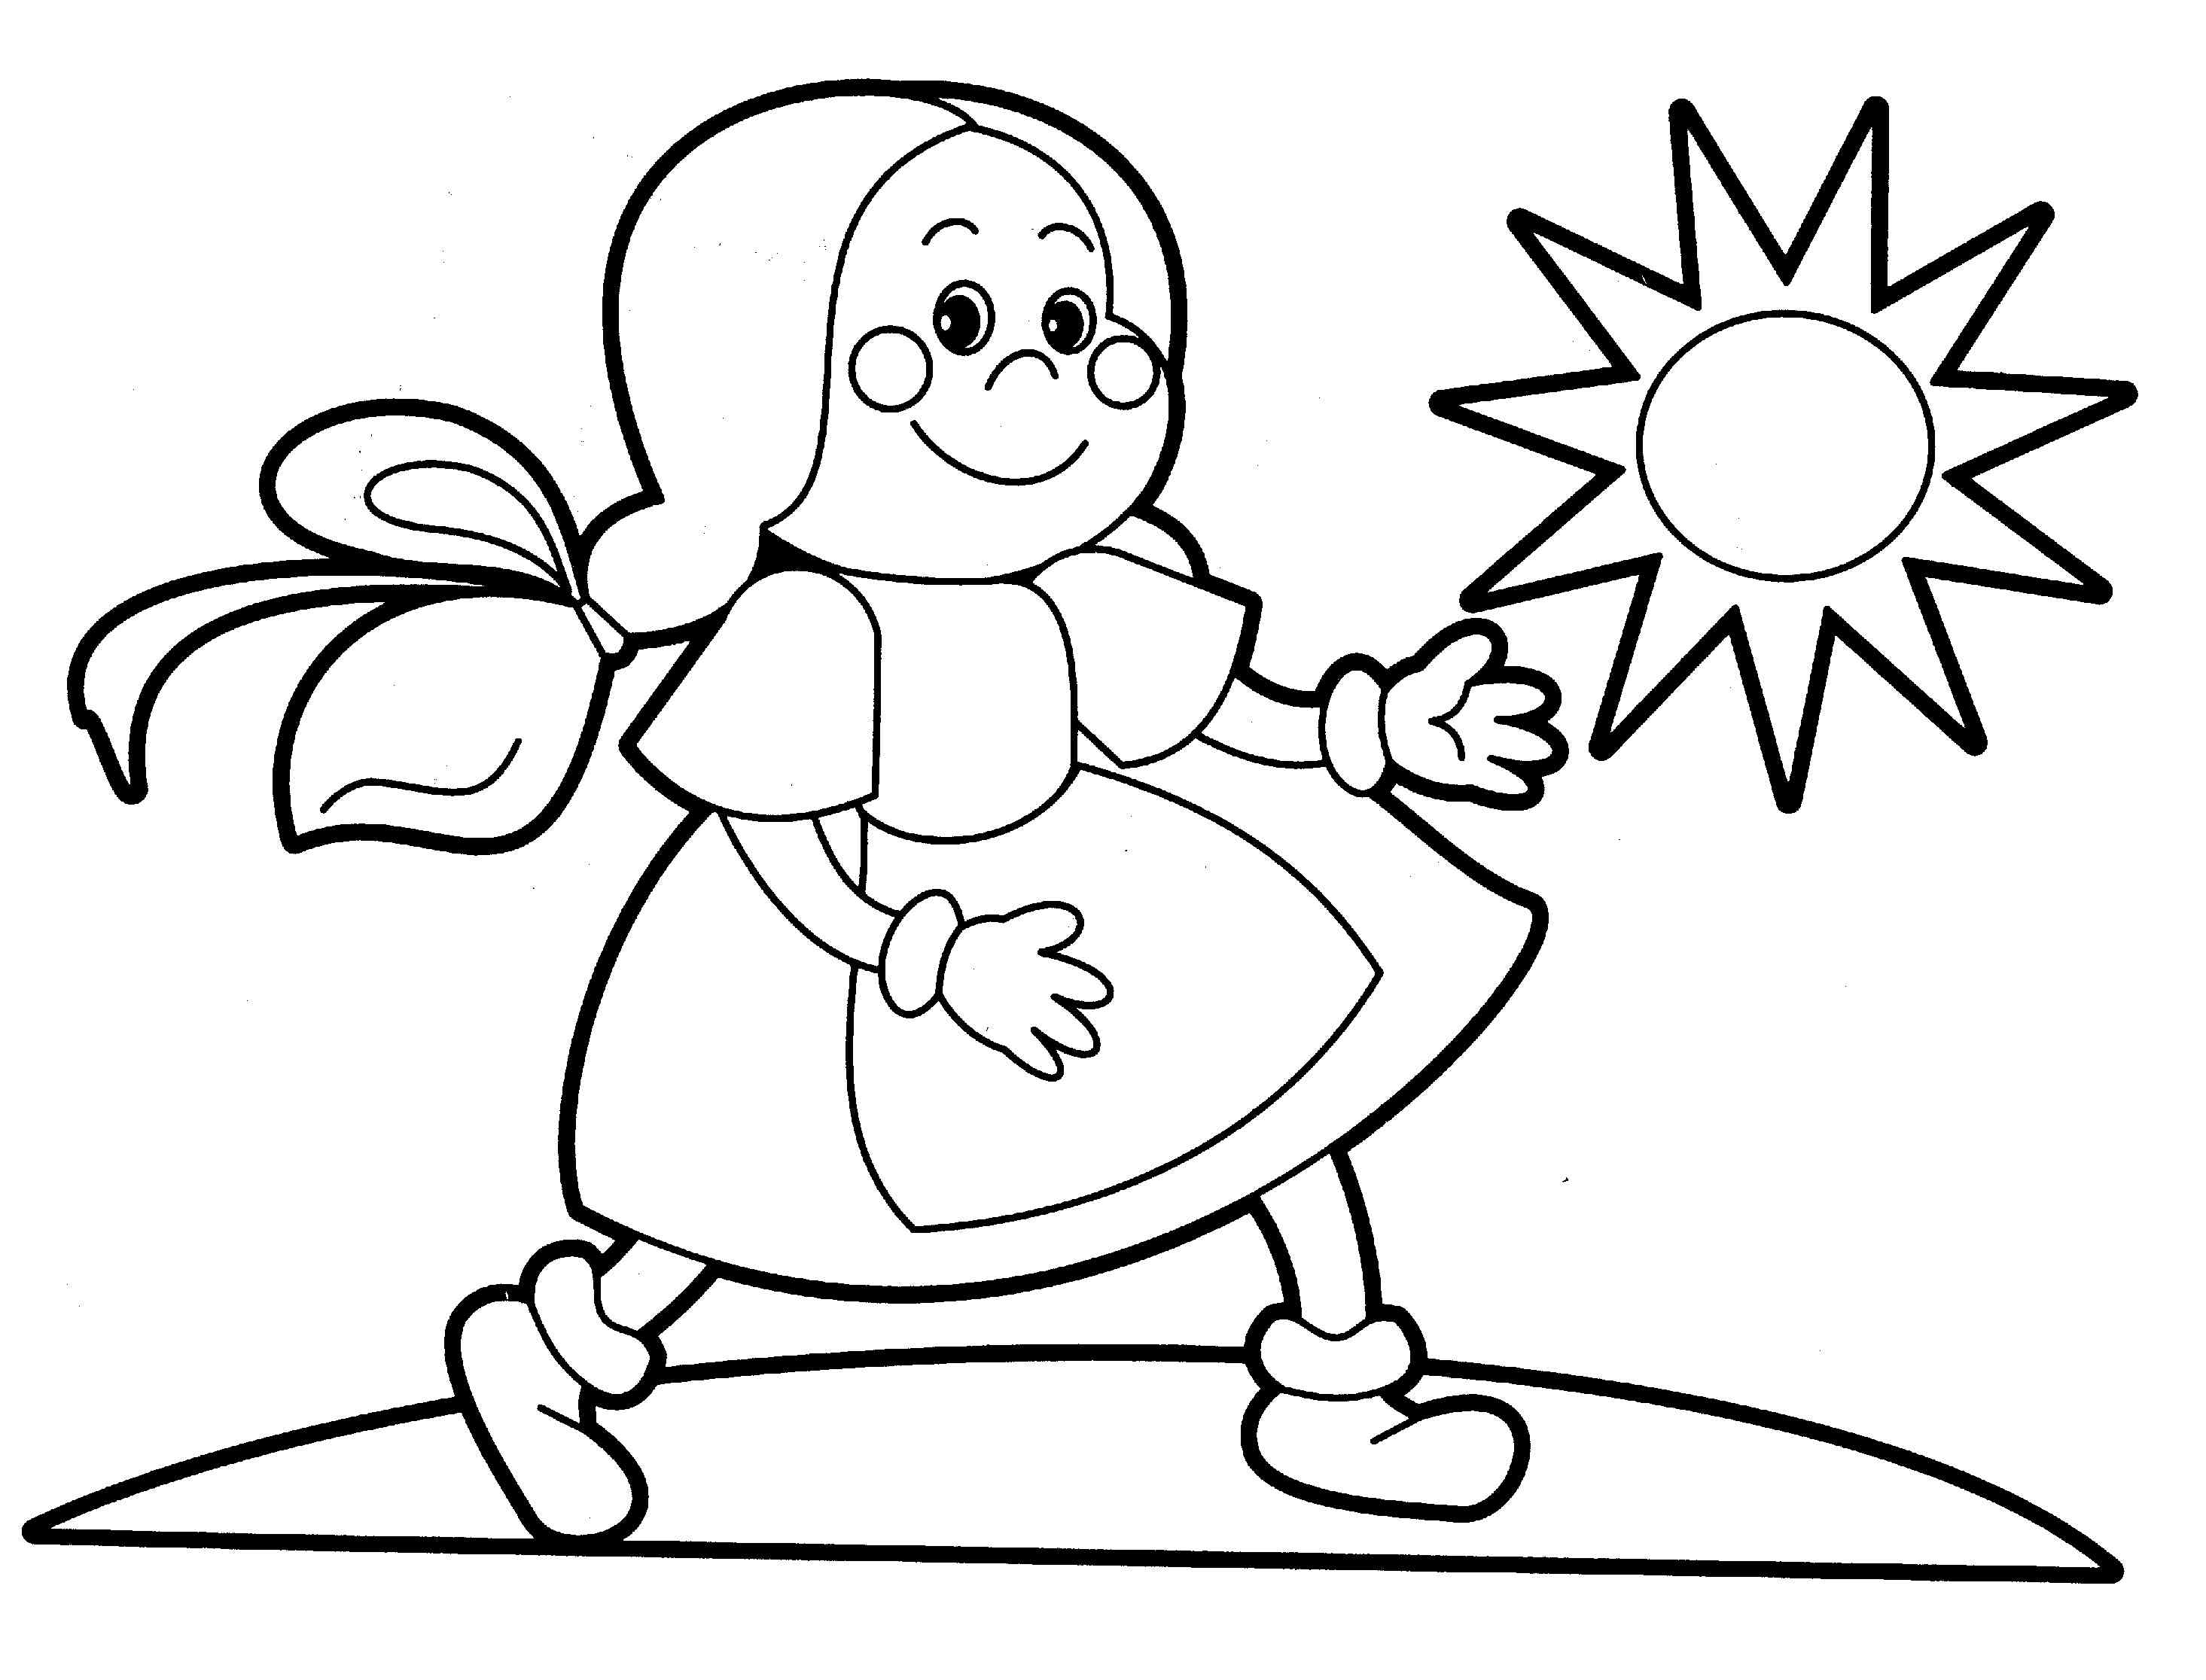 Little people coloring pages for babies 21 / Little people / Kids ...